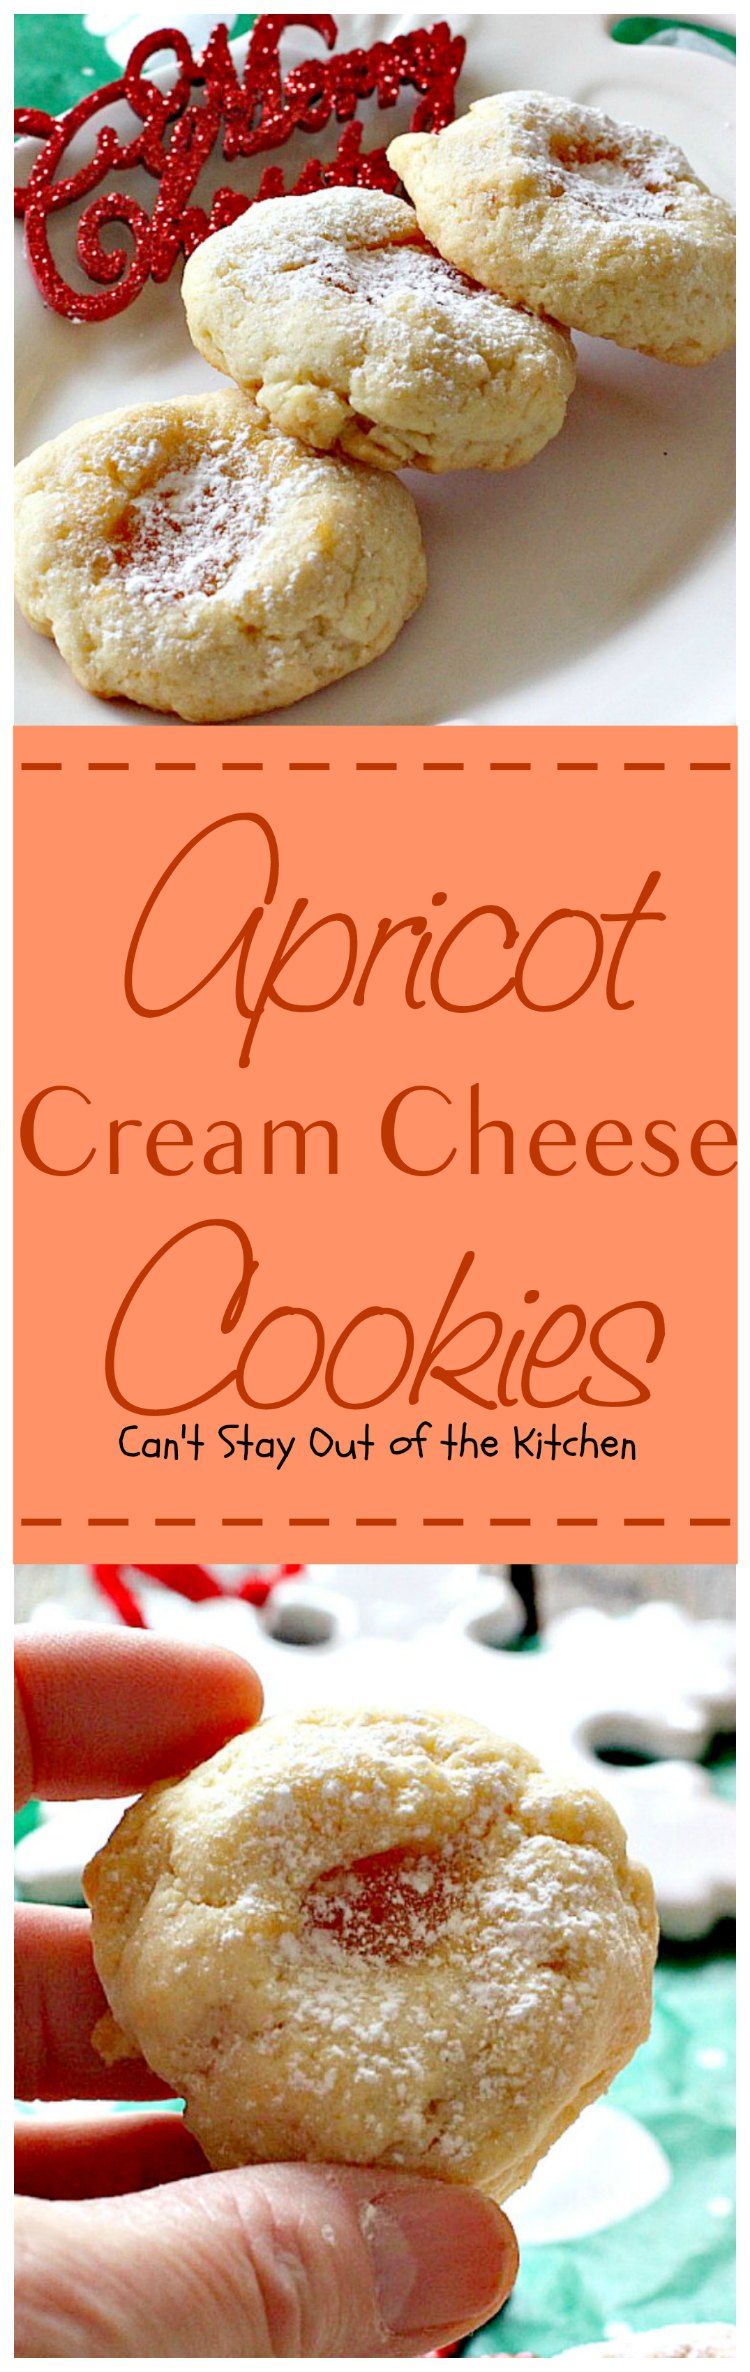 Apricot Cream Cheese Cookies | Can't Stay Out of the Kitchen